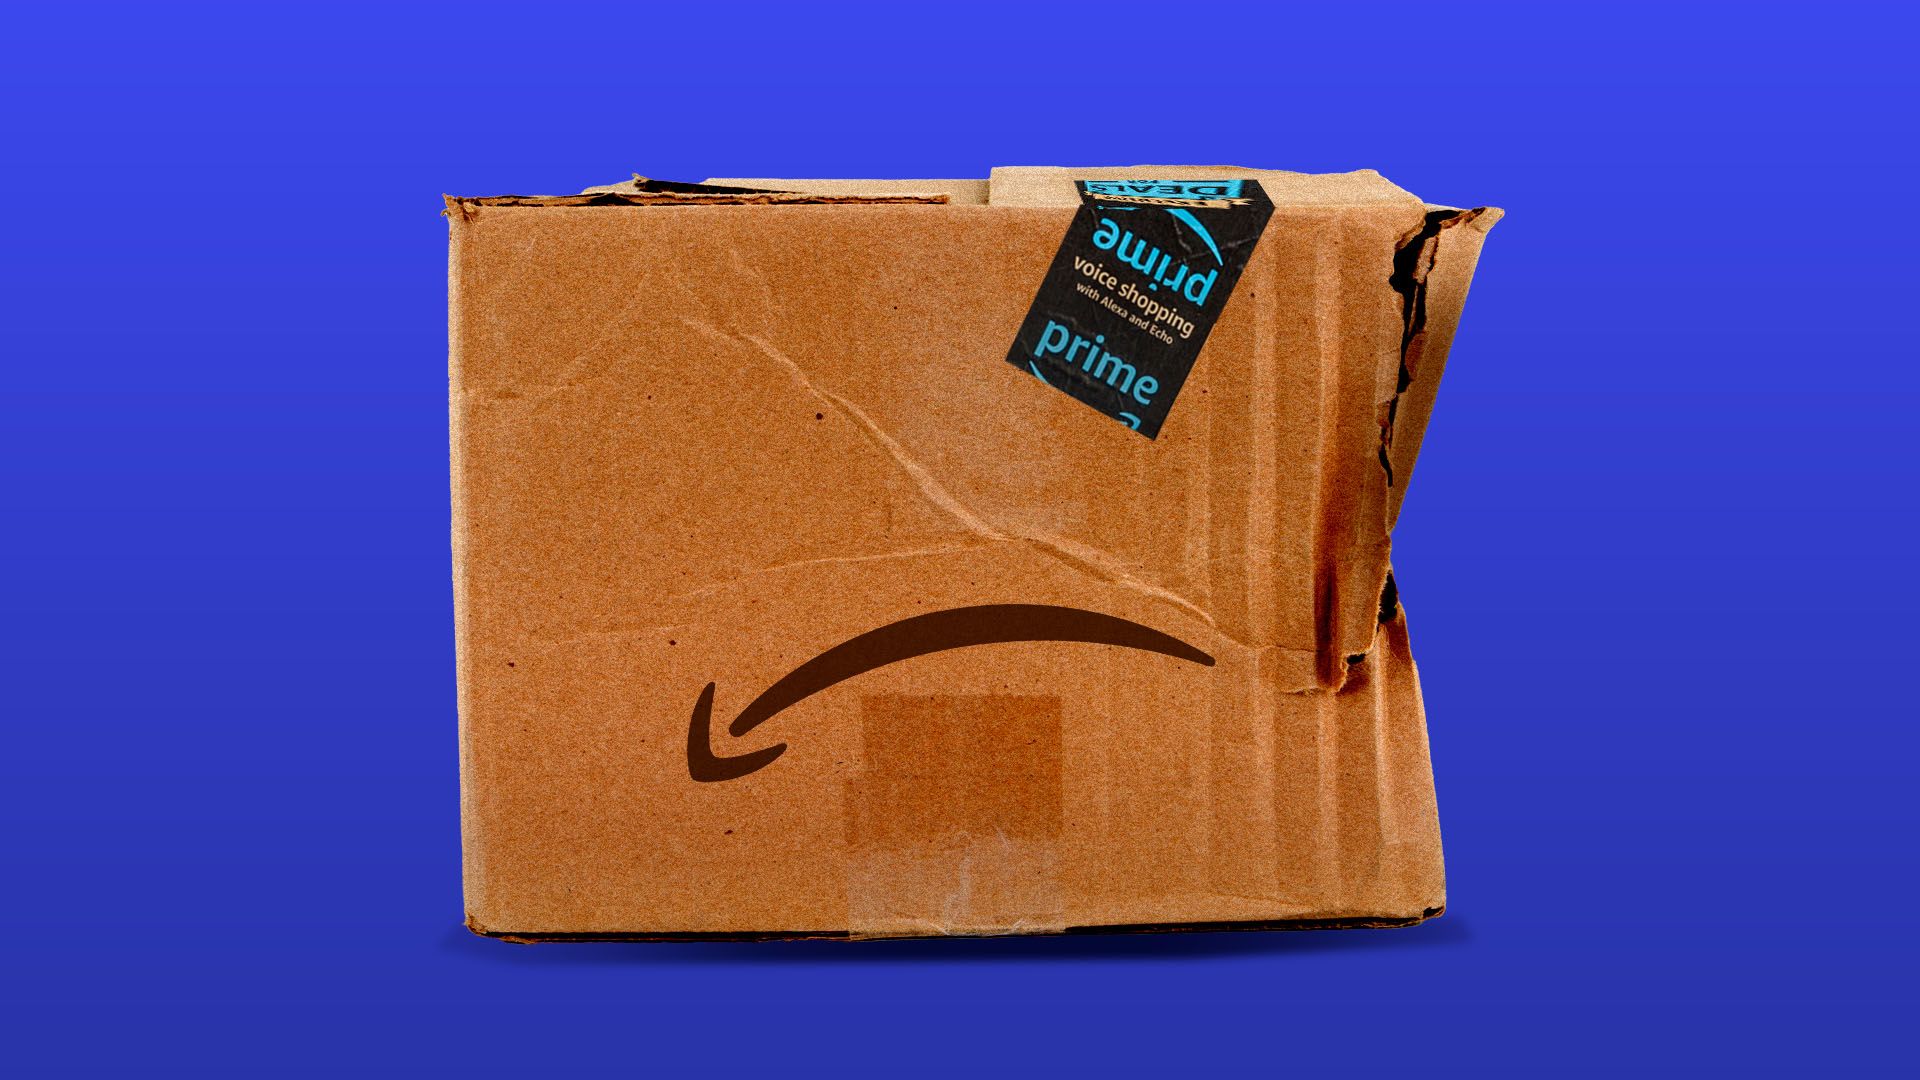 Illustration of a beat-up looking Amazon box, with their logo upside down in a frown